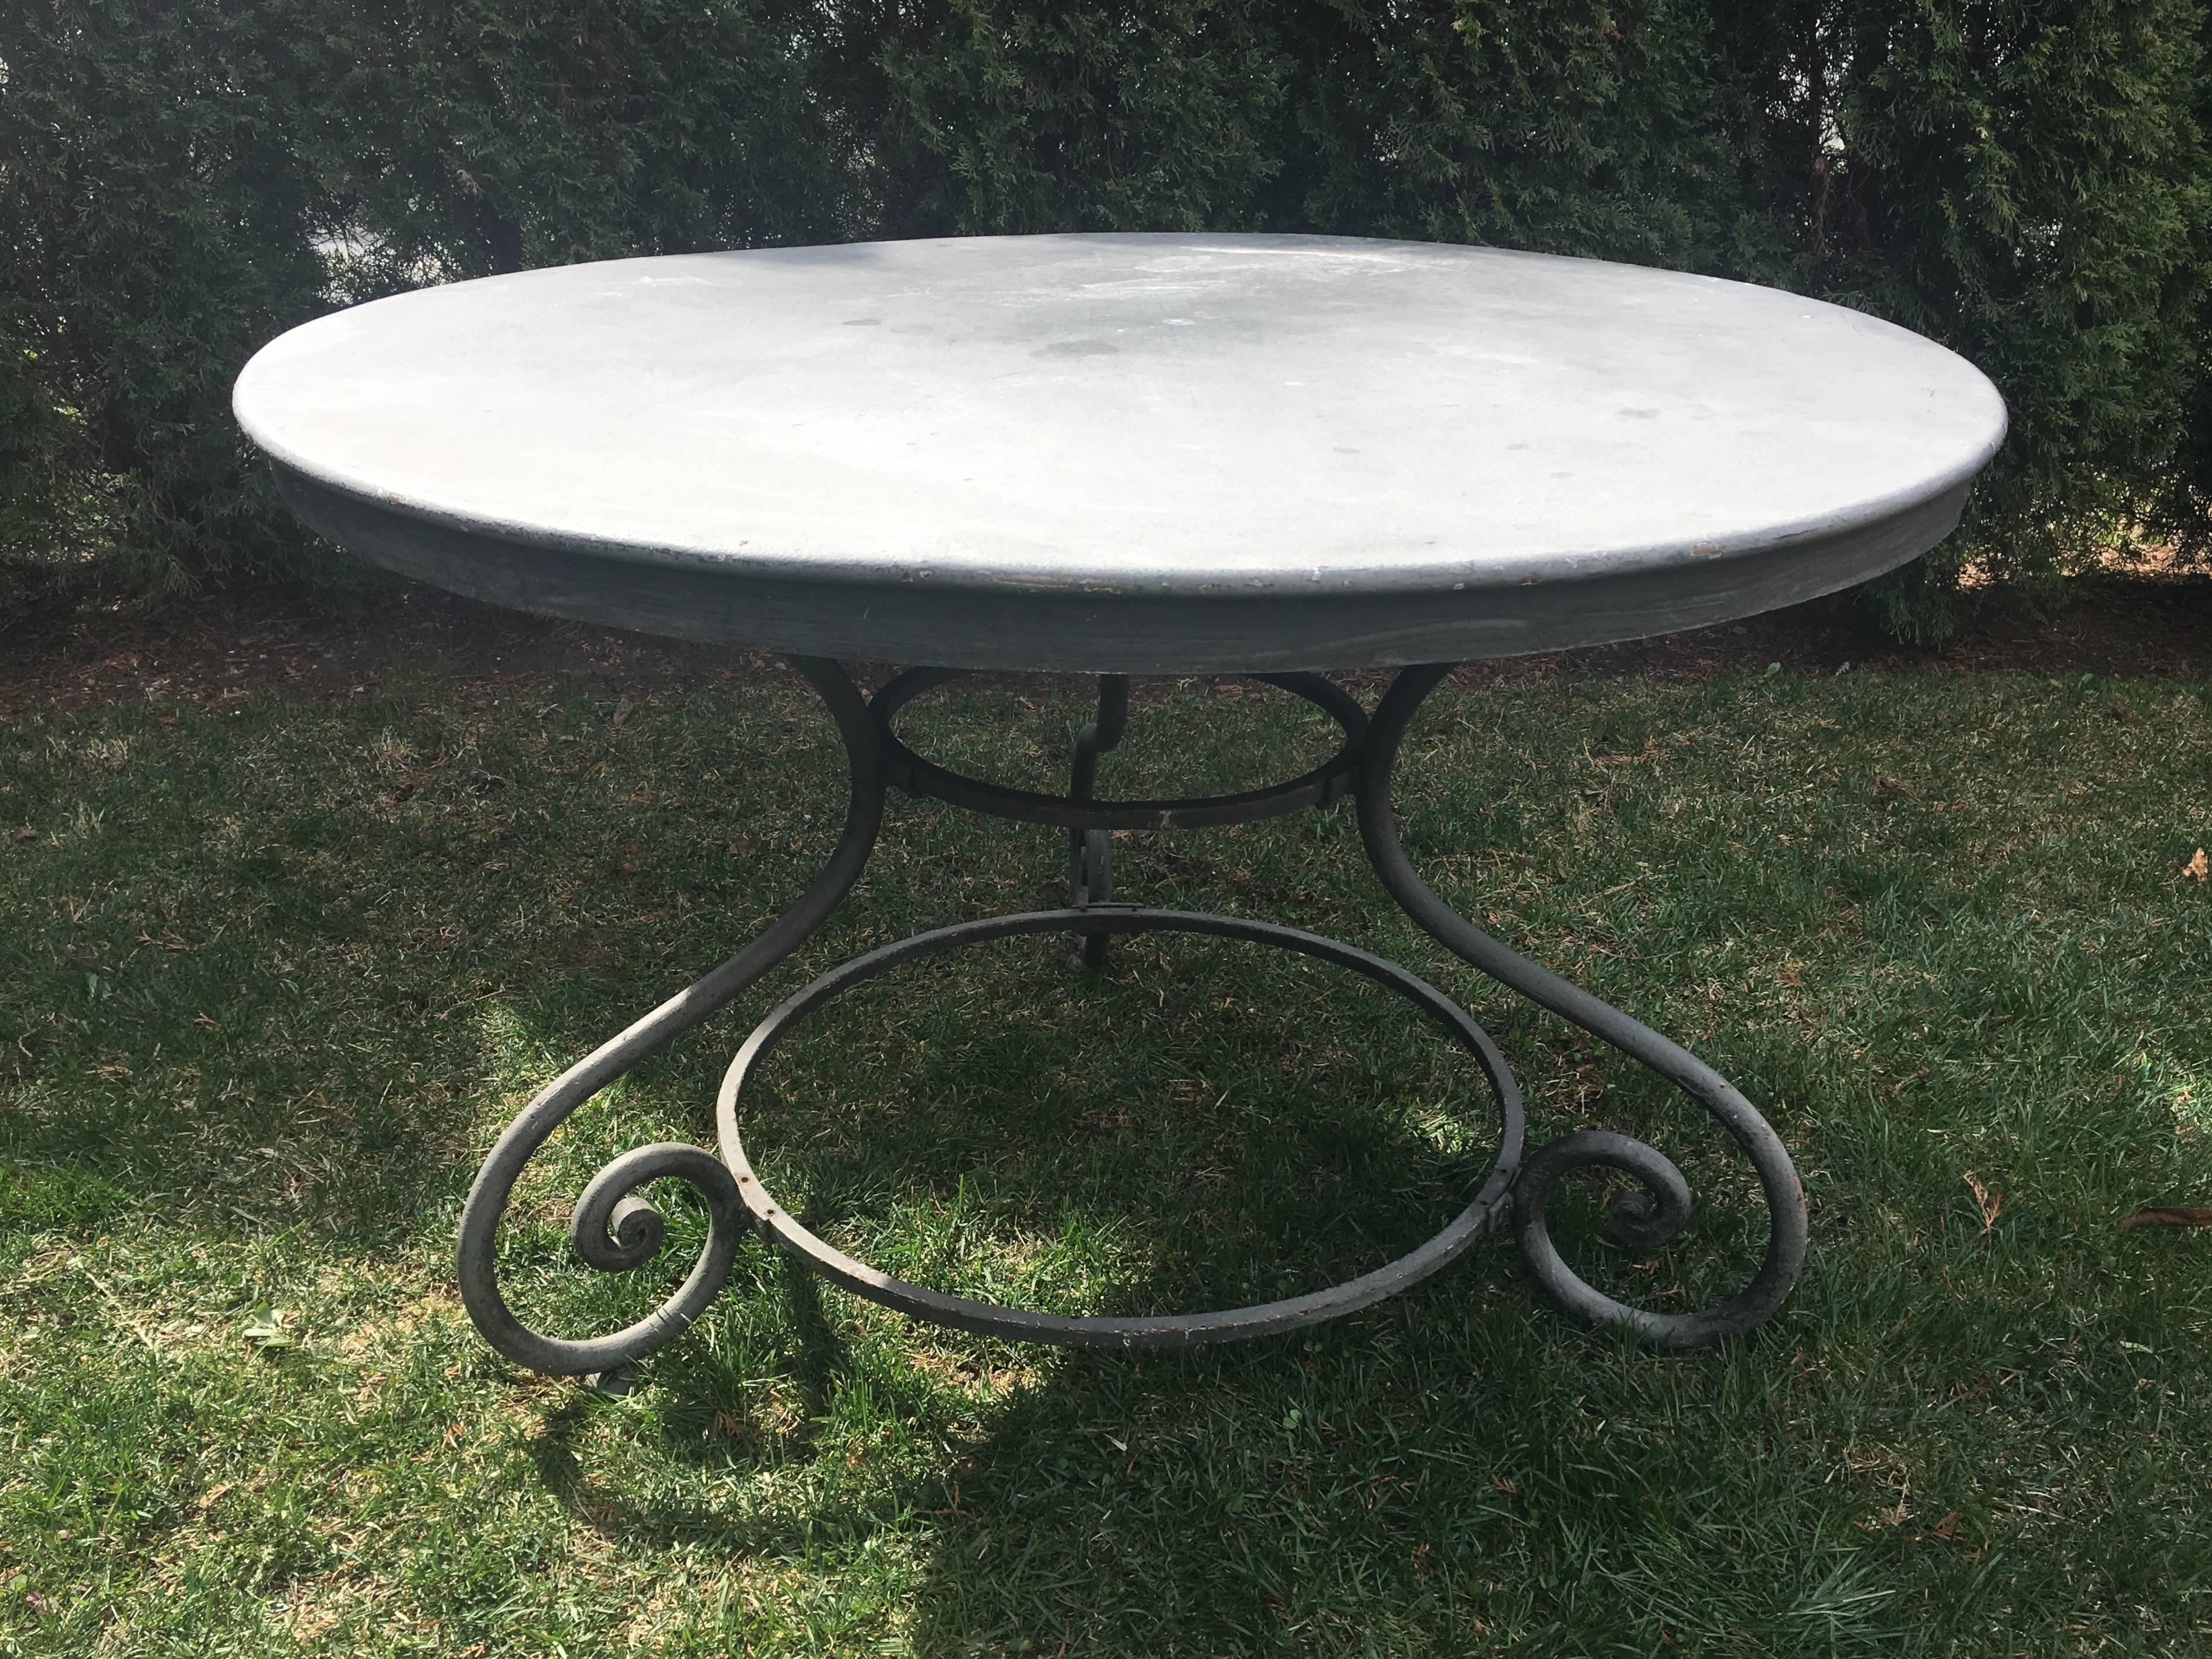 This heavy steel table has classically scrolled legs and is finished in a medium gray matte paint with mild-moderate surface weathering and very minor chipping to the paint. Perfect in the garden as your dining table, it is solid and level and will